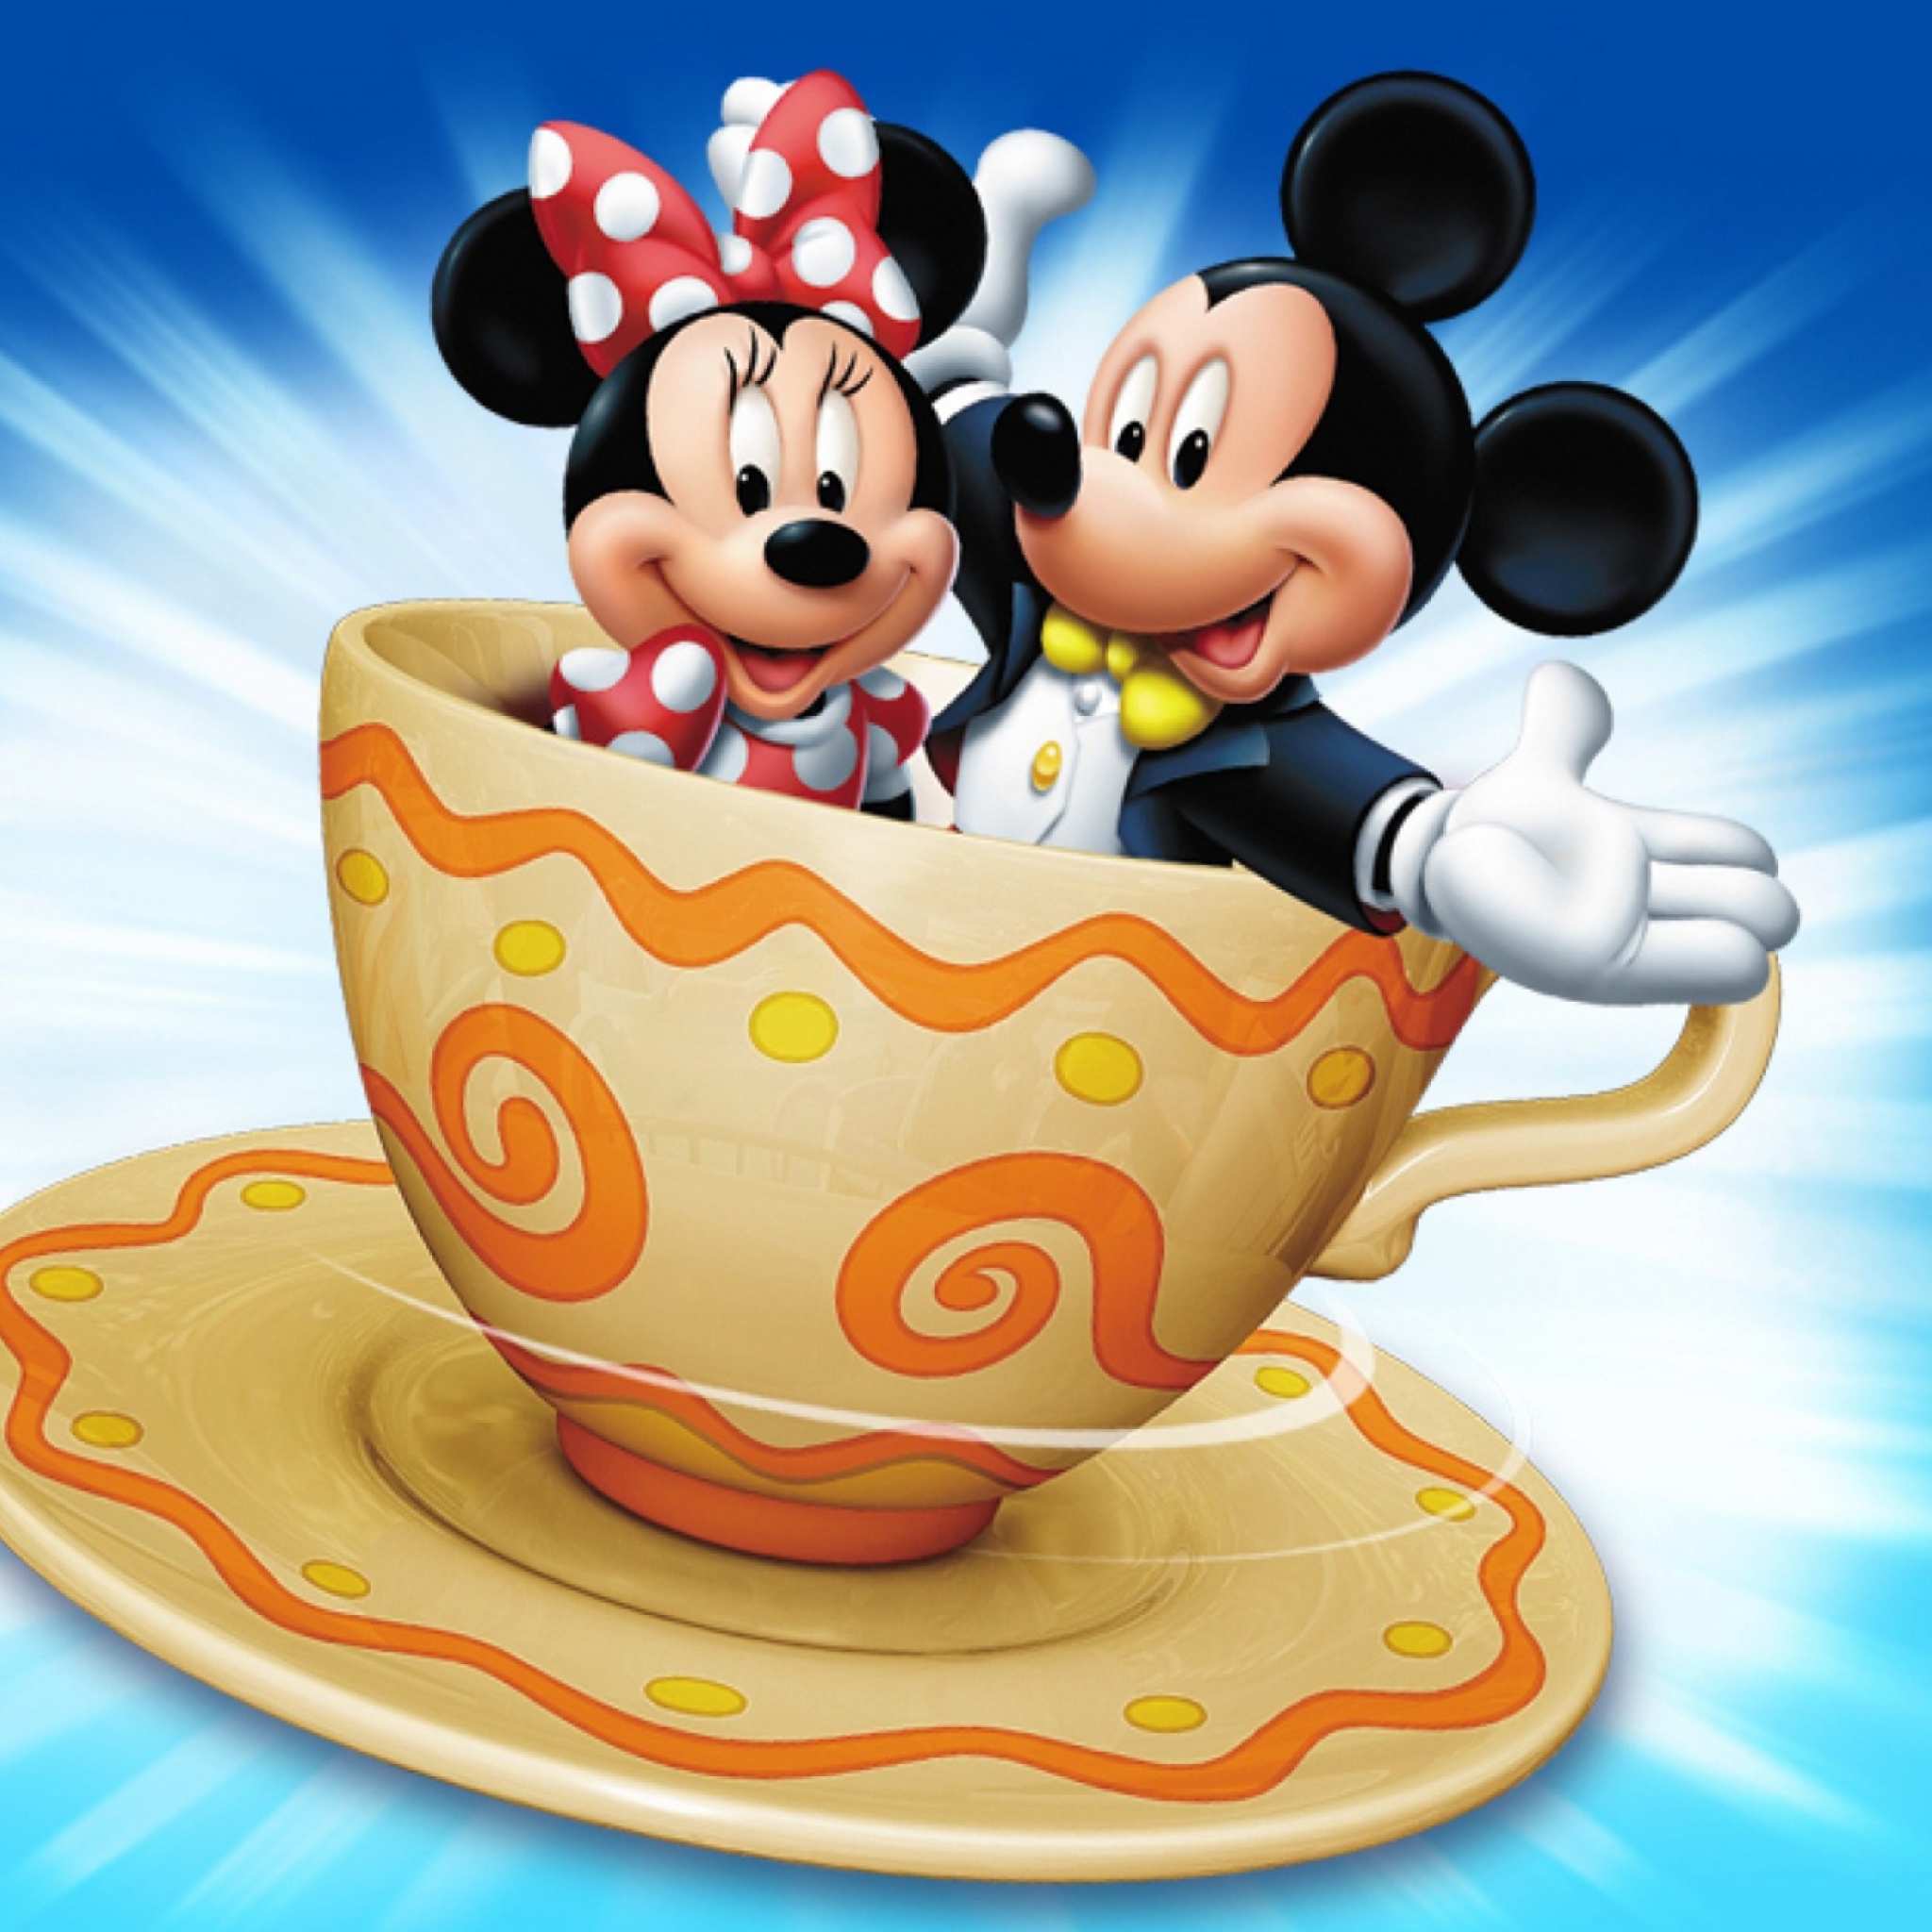 Mickey And Minnie Mouse In Cup wallpaper 2048x2048